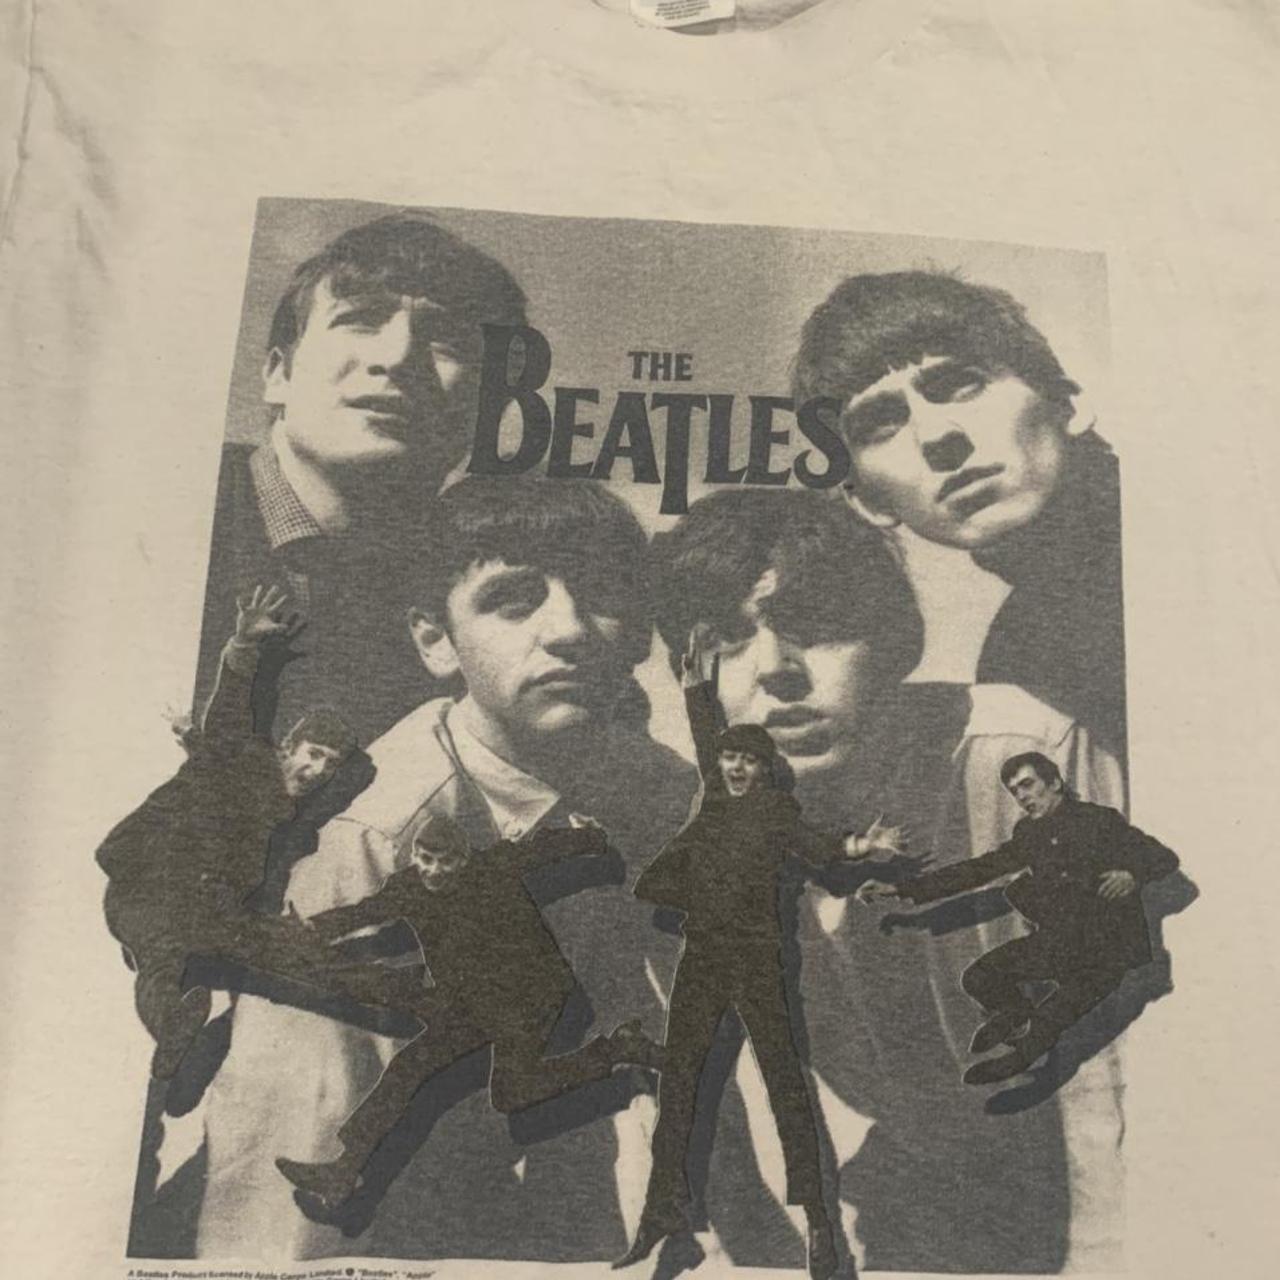 The Beatles 1996 size Large very good condition no... - Depop